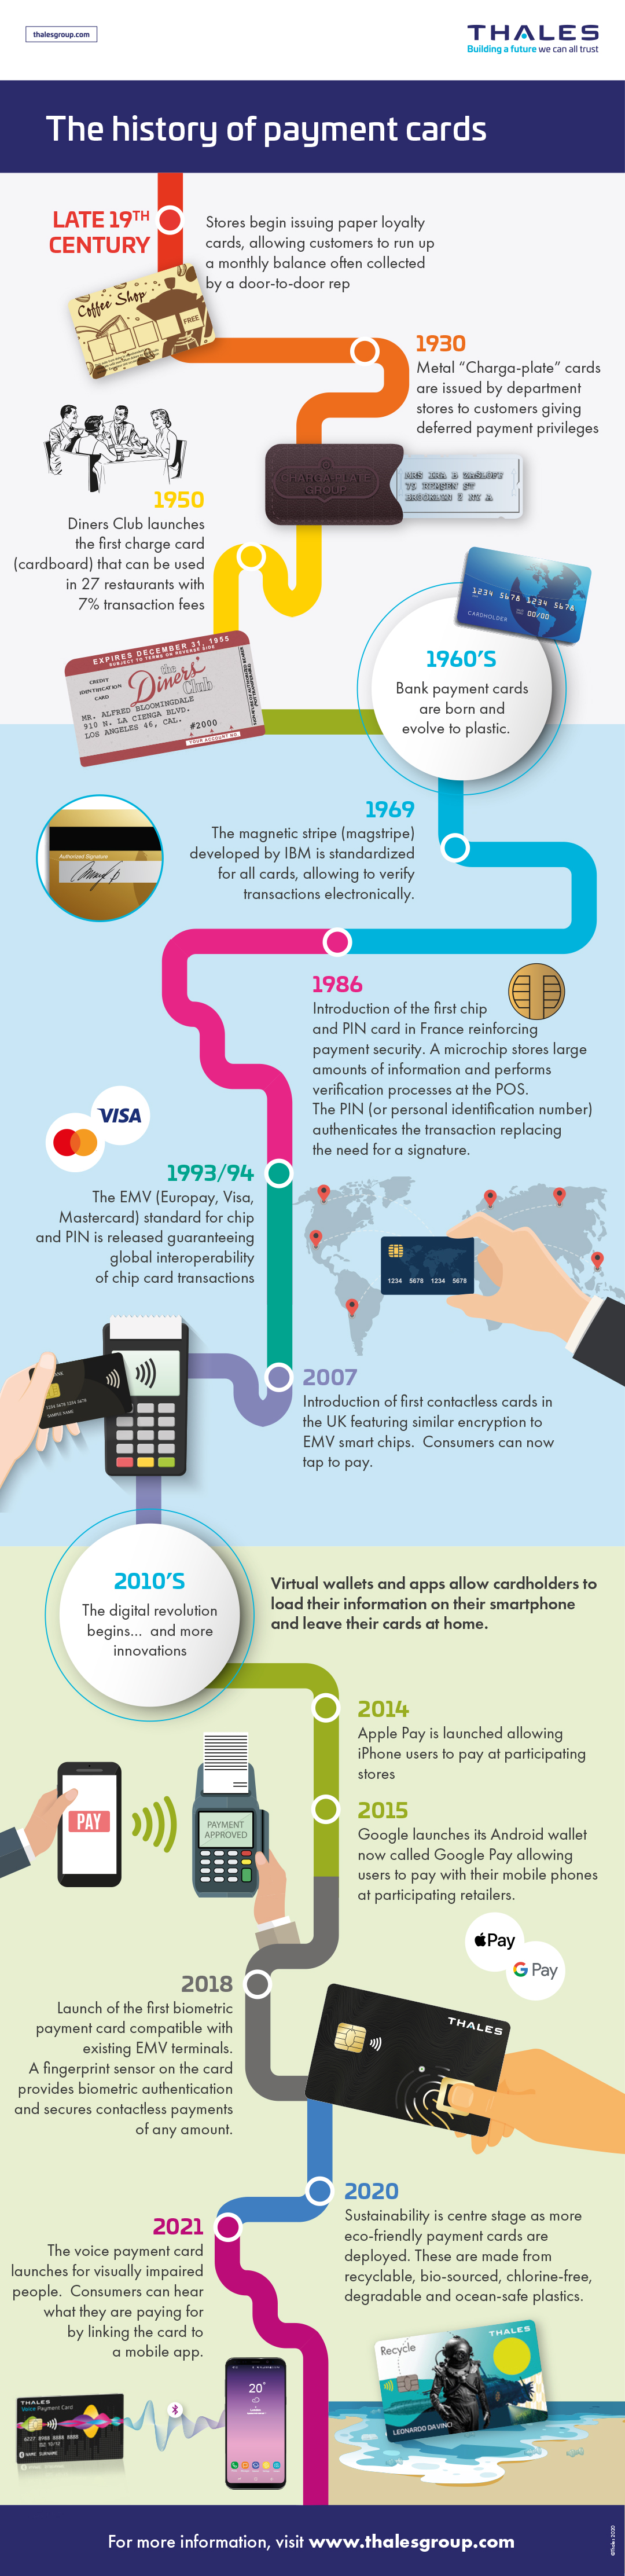 History of payment card